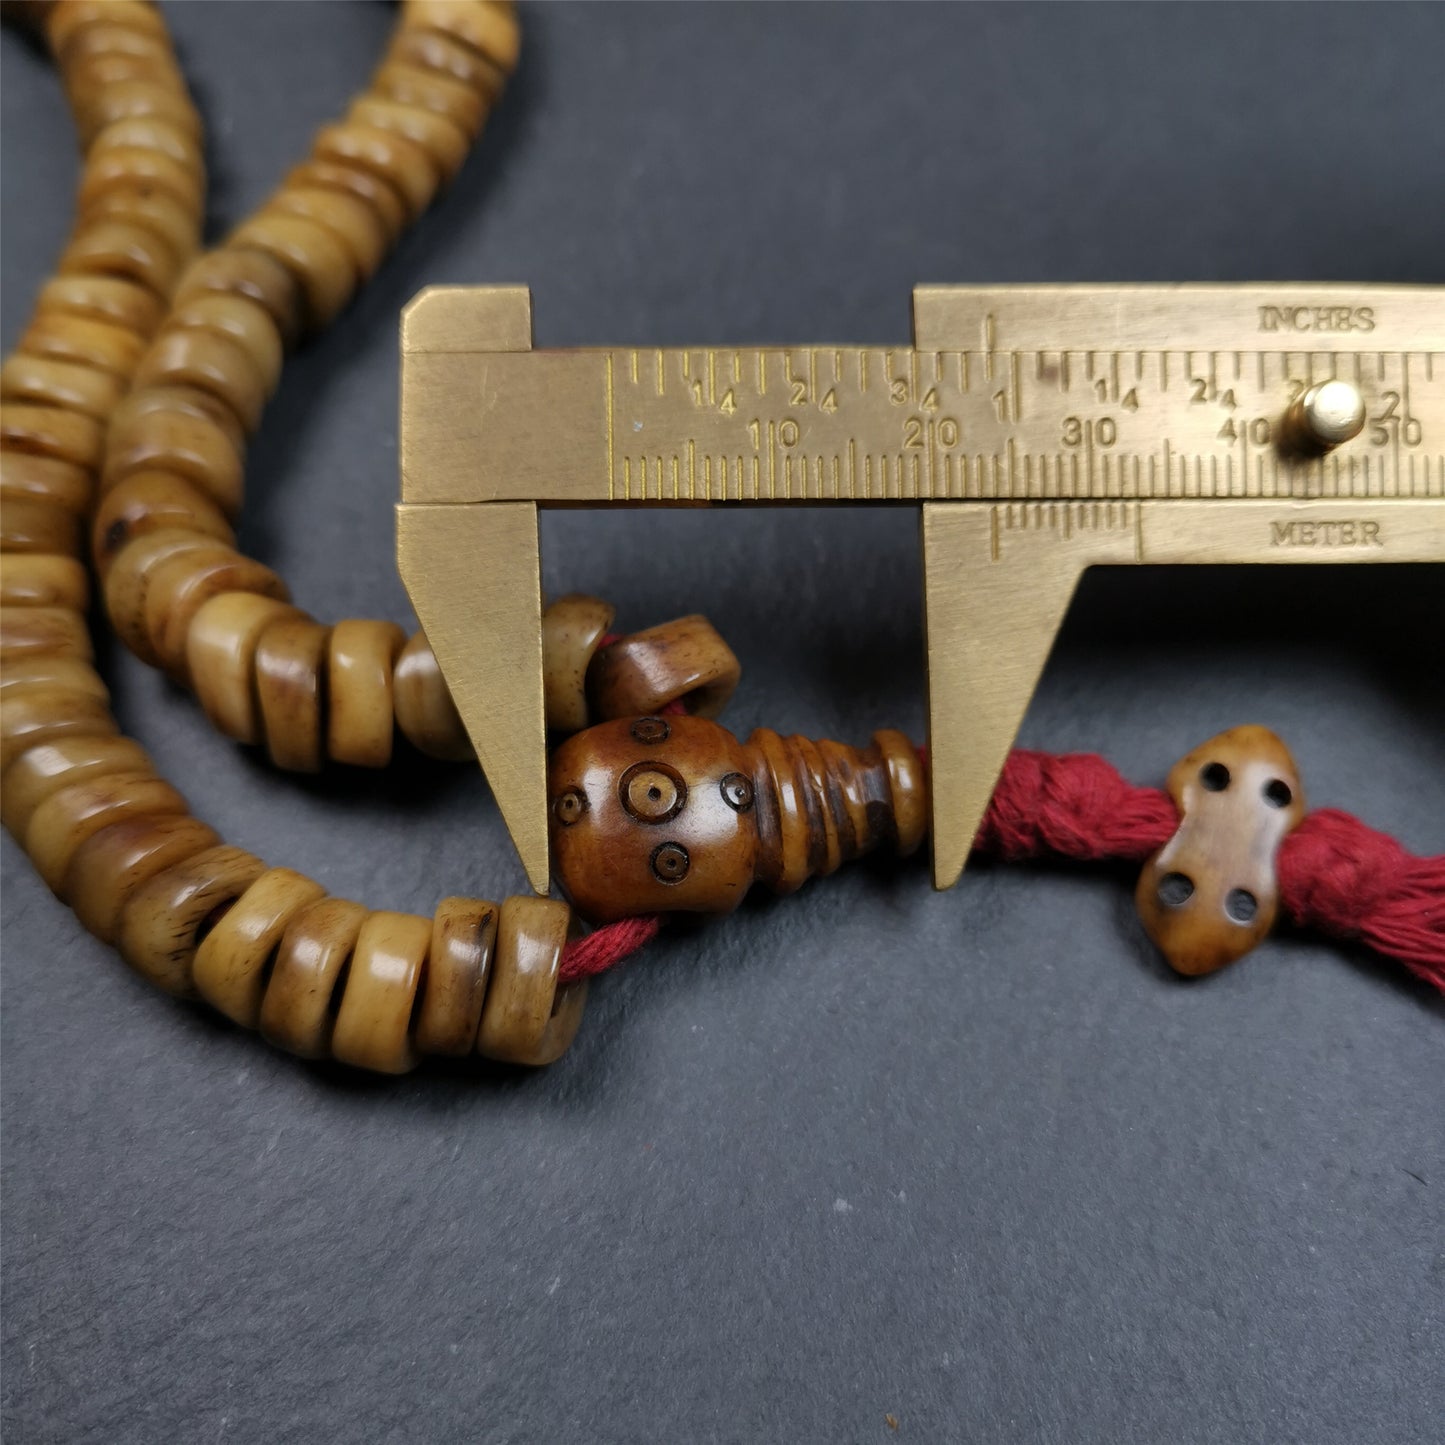 This unique wave shape mala was made by Tibetan craftsmen and come from Hepo Town, Baiyu County, the birthplace of the famous Tibetan handicrafts,about 30 years old. It is made of yak bone, yellow color,108 wave shape beads diameter of 10mm / 0.4",circumference is 48cm / 18.9", end of bone guru bead and vajra pendant. It reflects the original ascetic state of the original ecology, very simple and full of sense of time